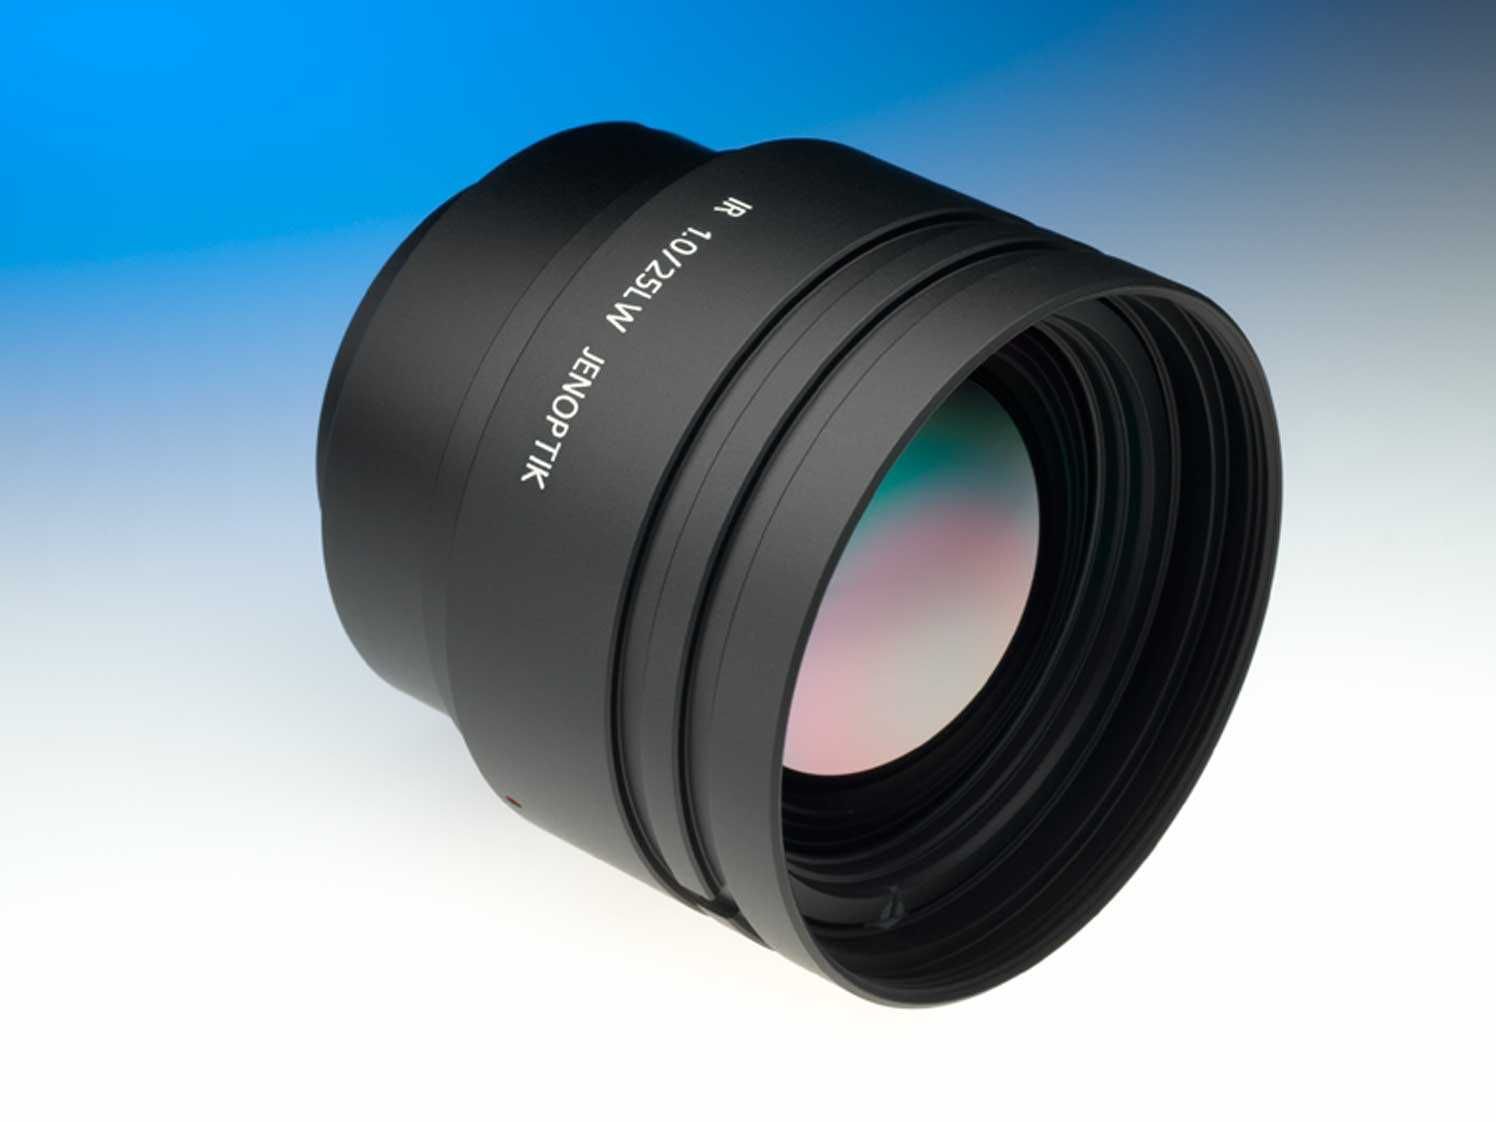 Customized and Standardized Objective Lenses